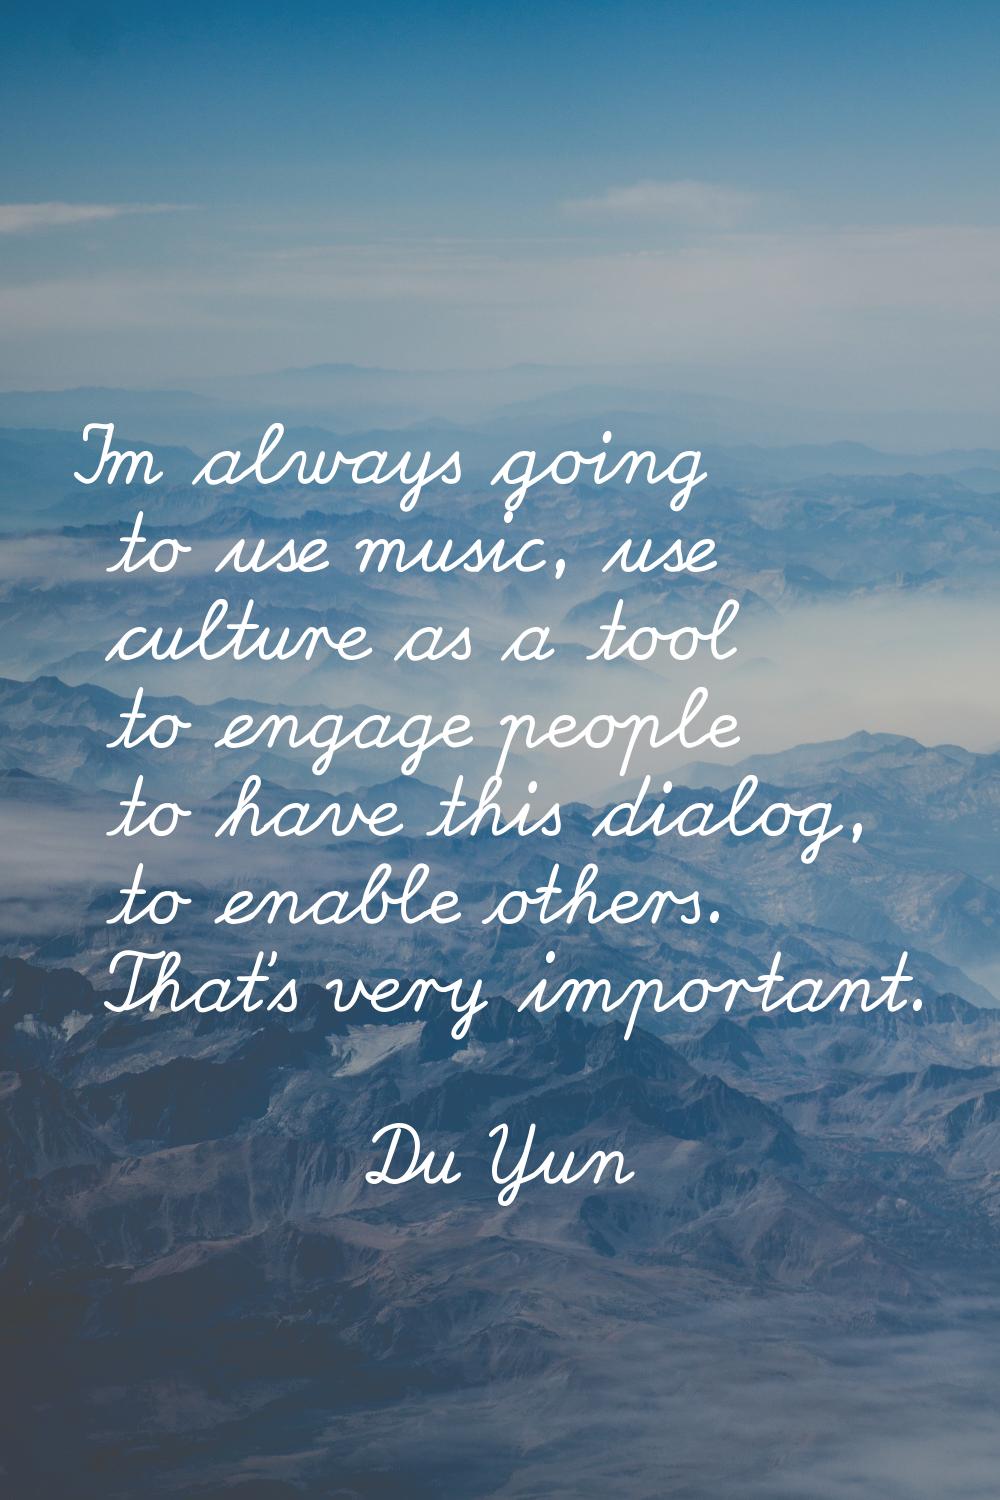 I'm always going to use music, use culture as a tool to engage people to have this dialog, to enabl